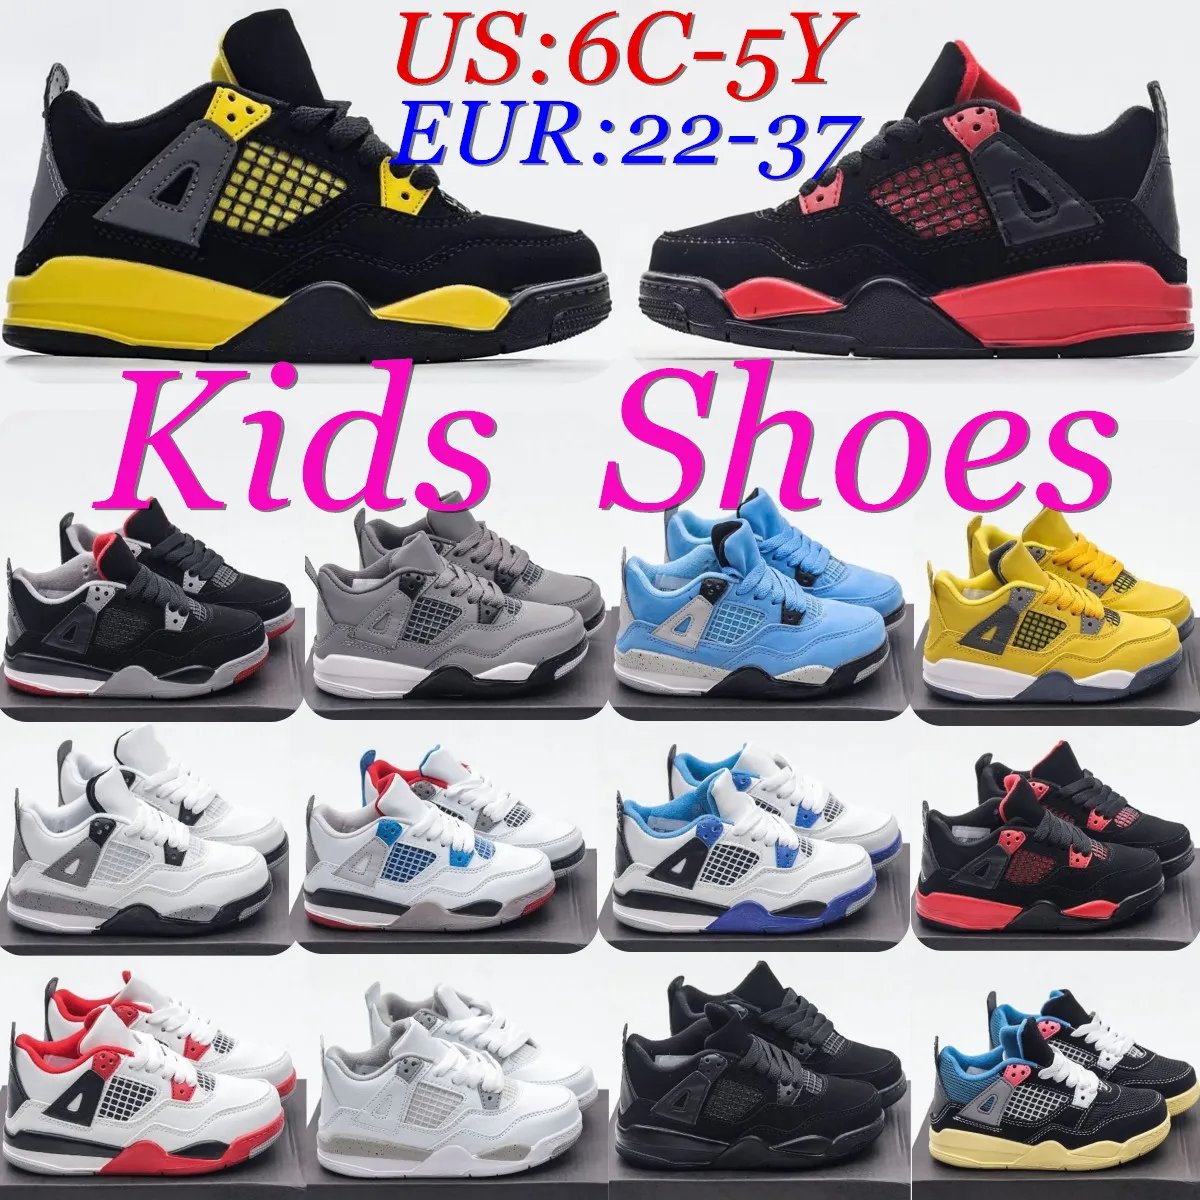 4S Kids Shoes 4 Basketball Shoe Black Cat Toddler Sneakers TD Cool Grey University Blue Brud Boys Girls Basketball Pour Enfants Athletic Outdoor With Box